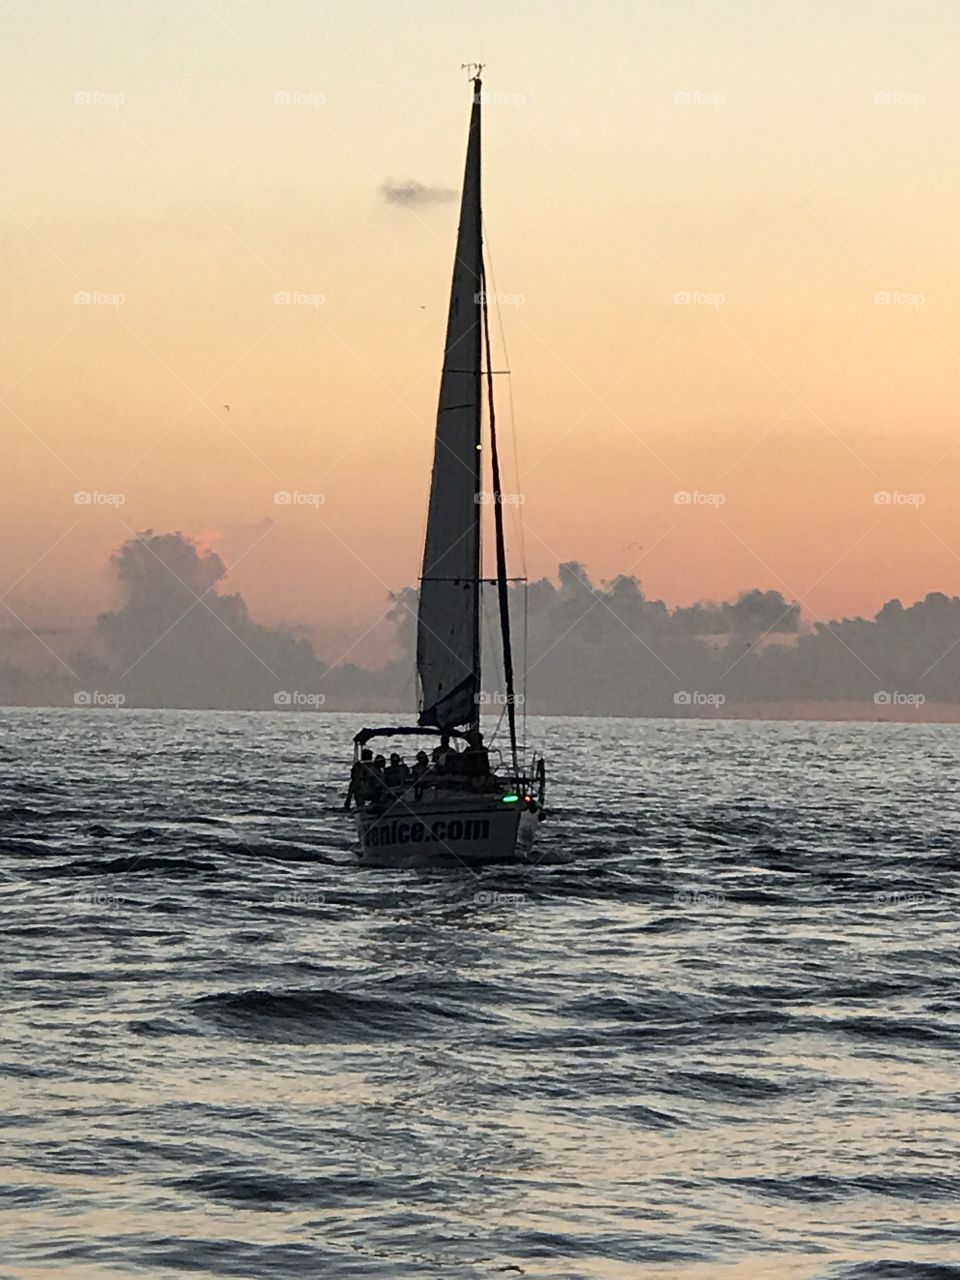 Sailboat in silhouette at sunset 